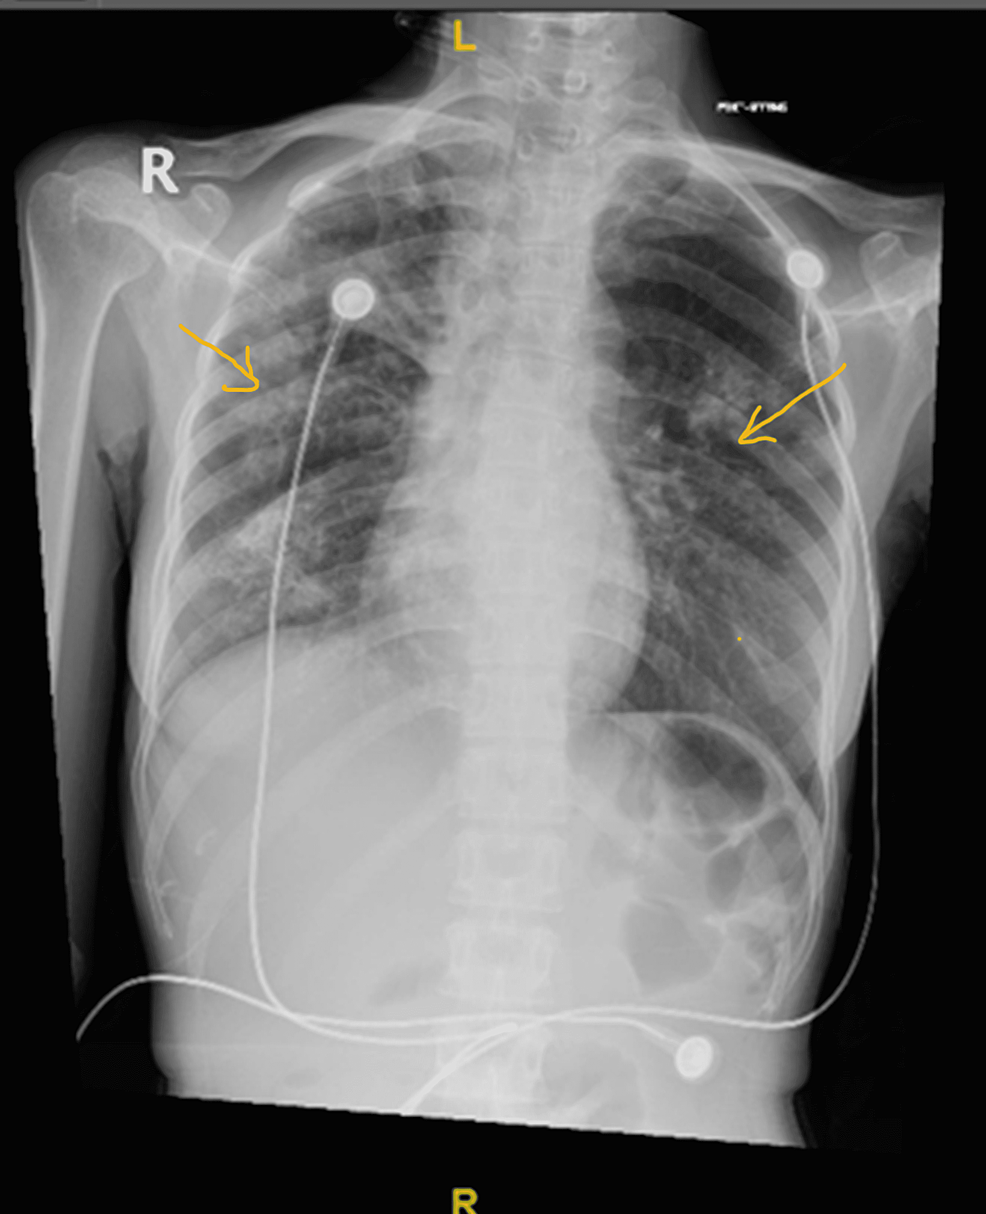 Bilateral-inhomogeneous-faint-lung-opacities,-the-early-consolidative-process-likely-of-inflammatory-origin